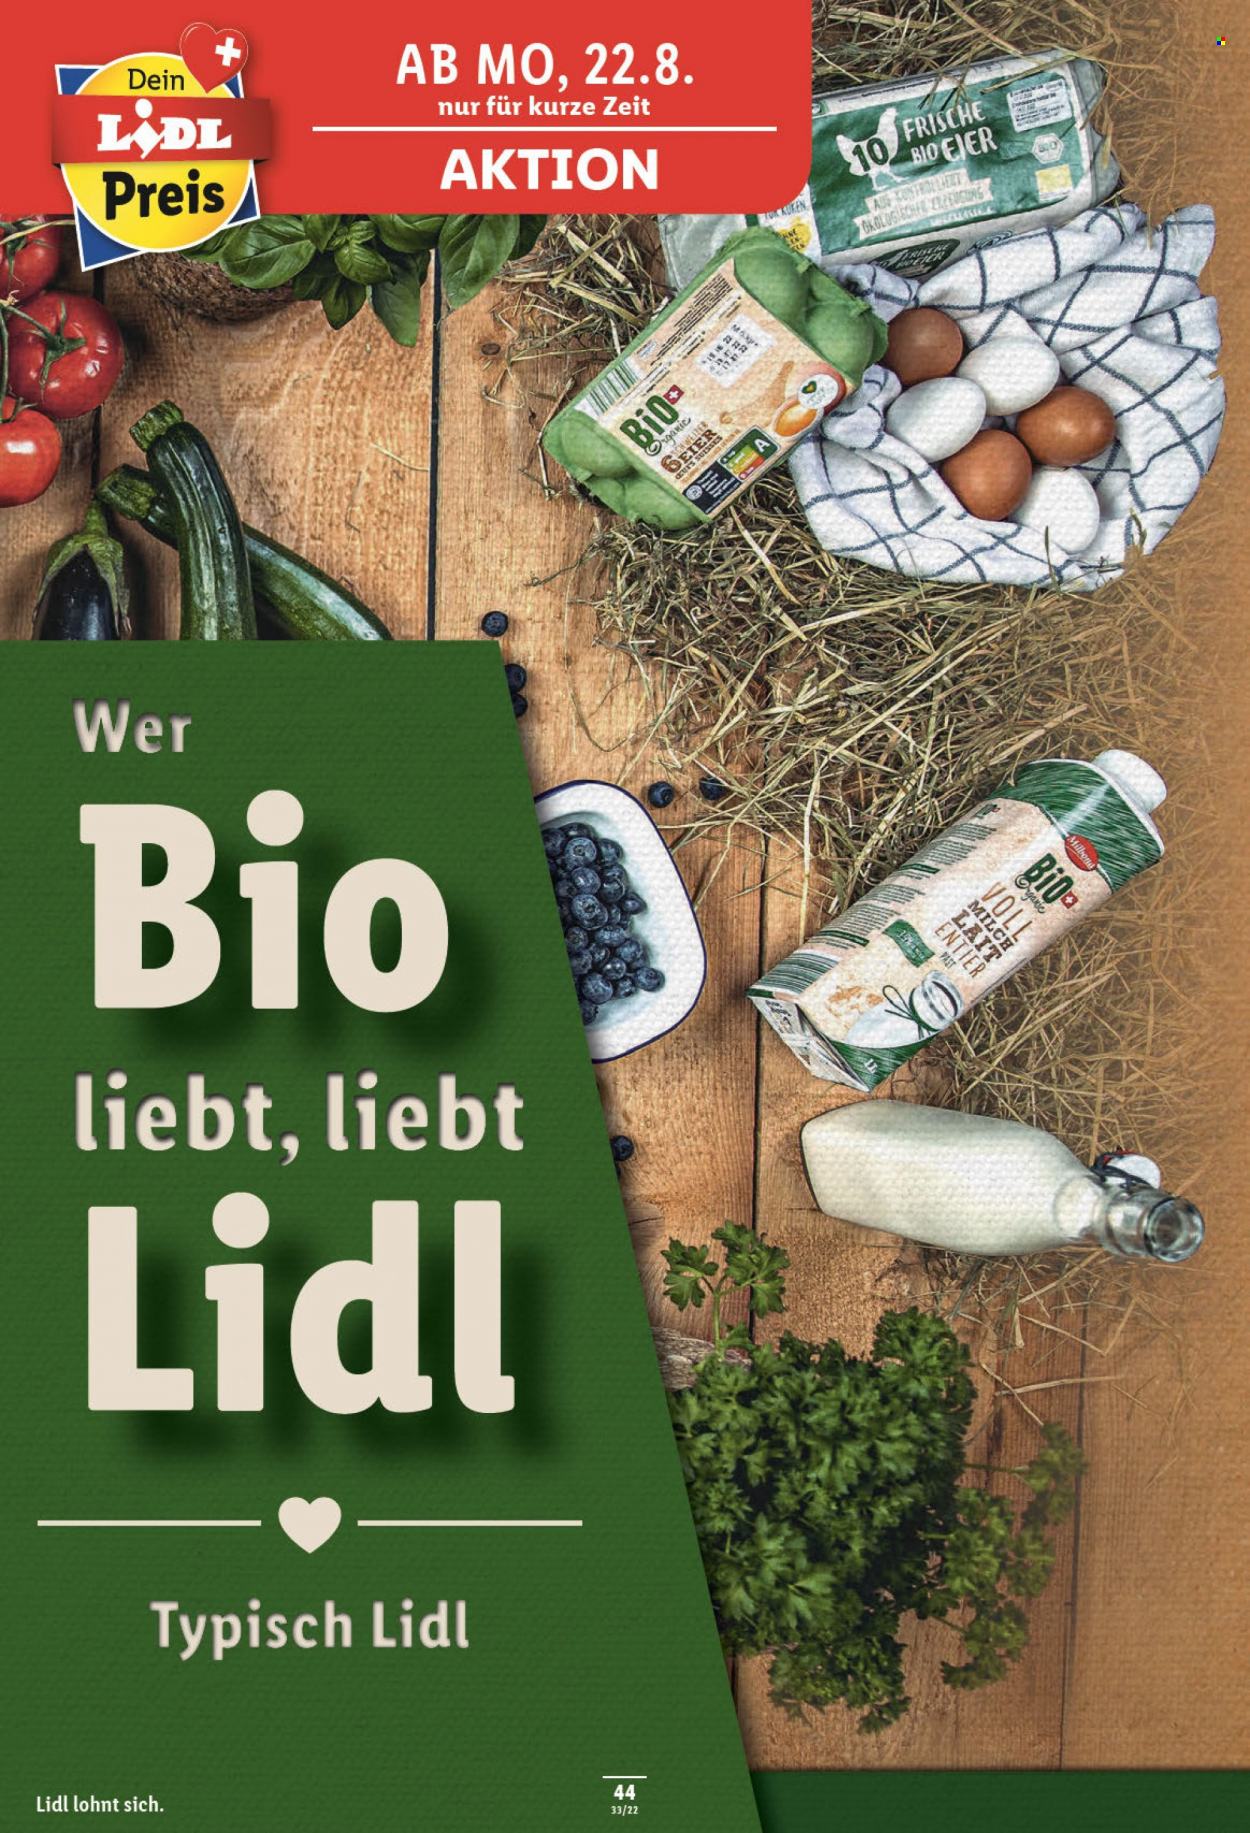 Catalogue Lidl - 18.8.2022 - 24.8.2022. Page 44.